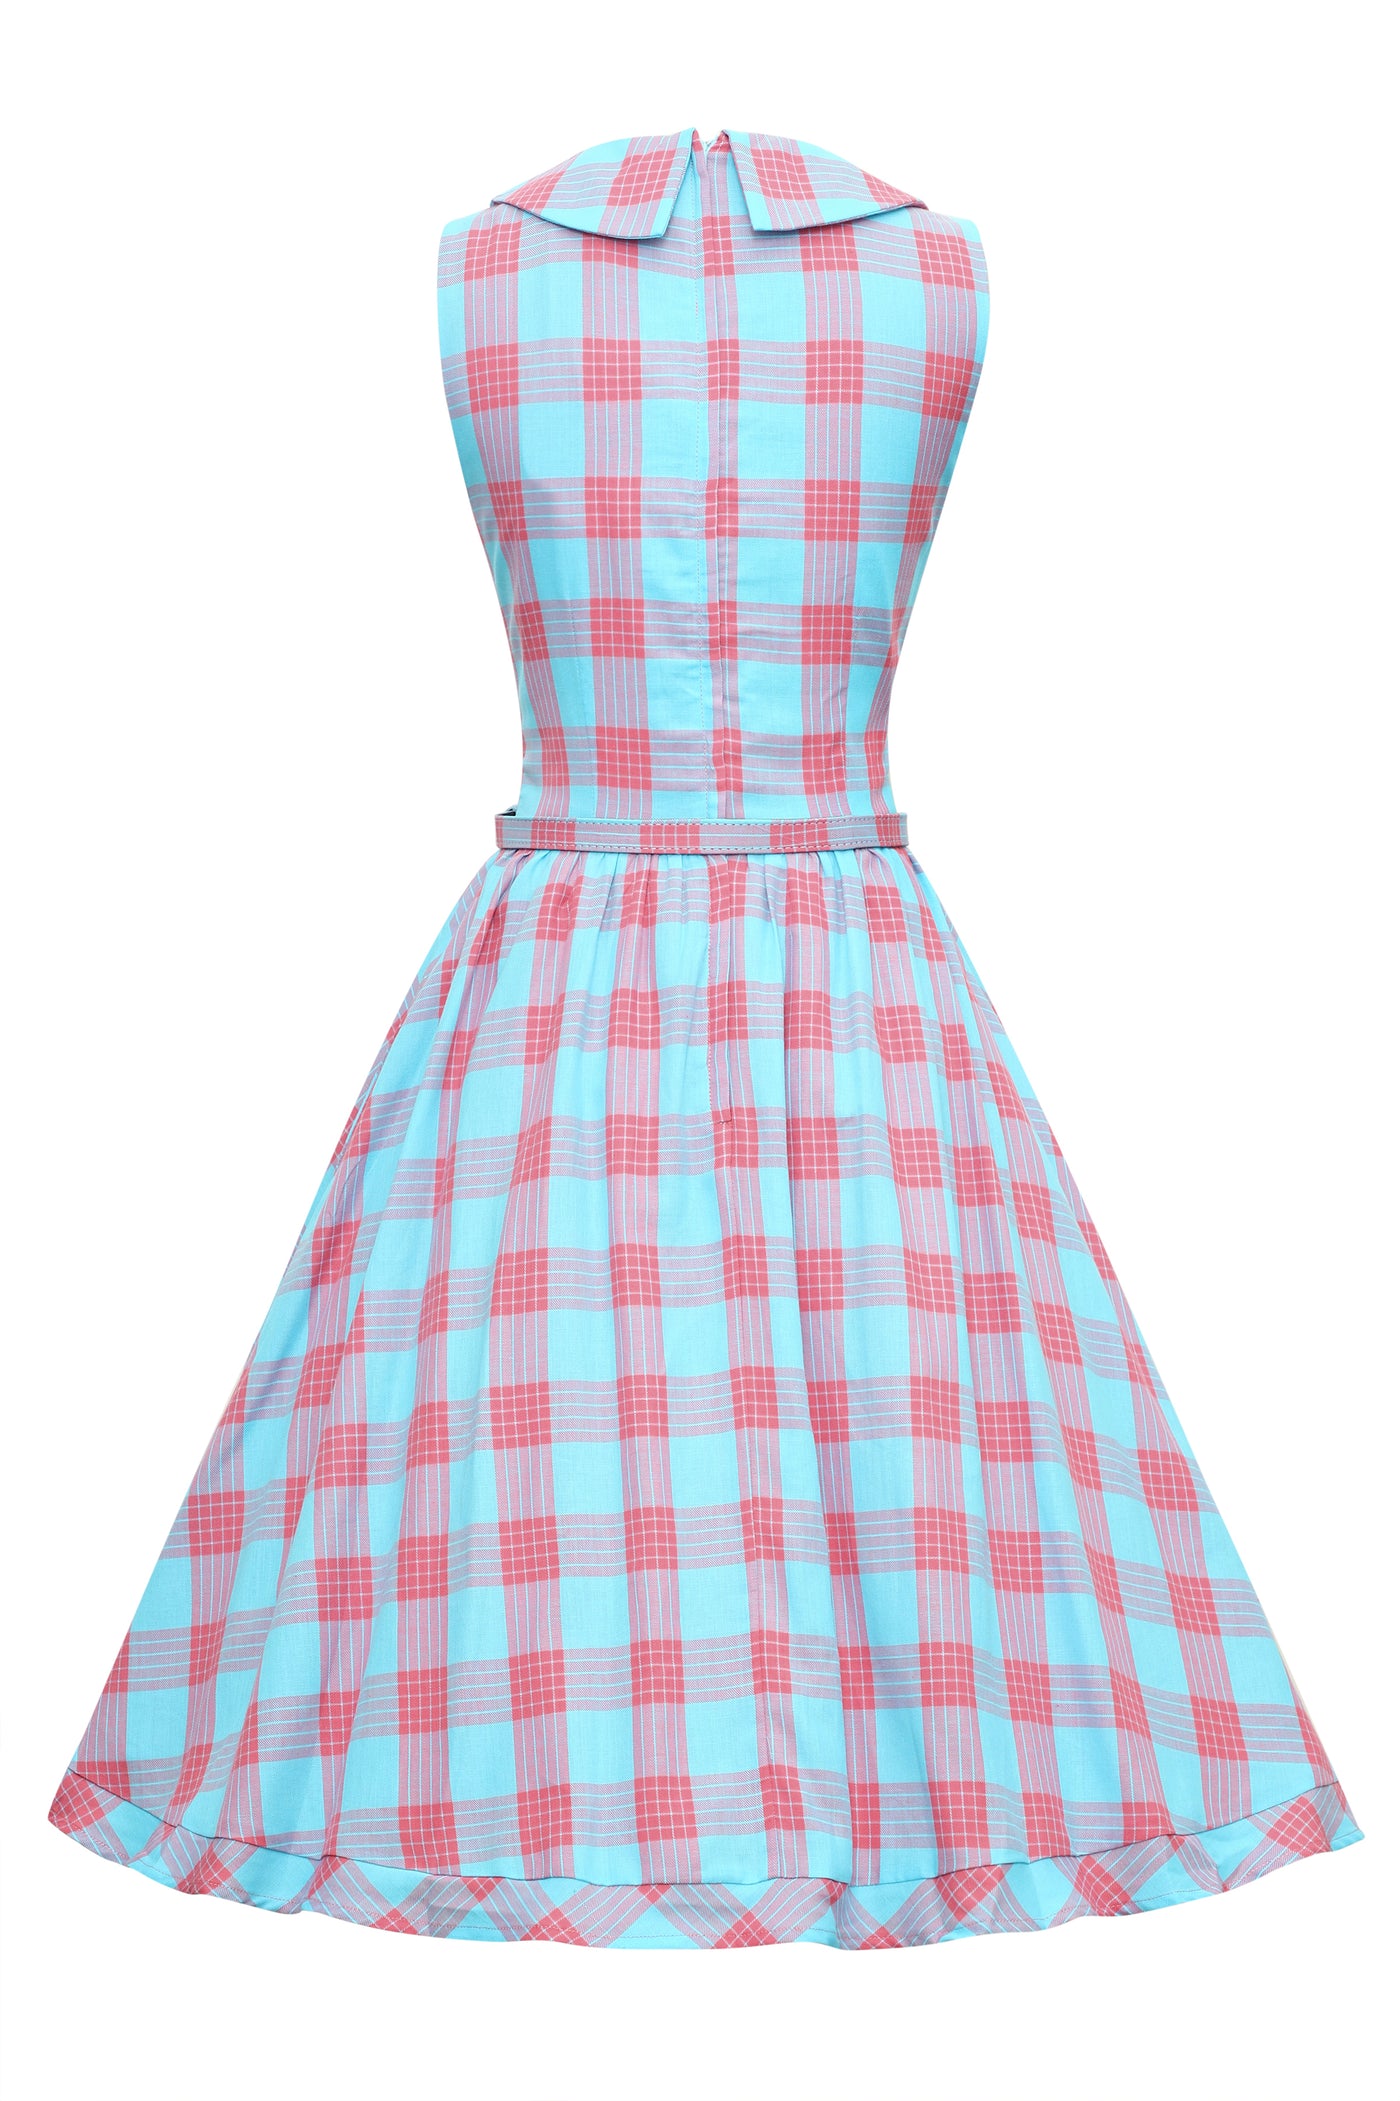 Blue and pink check shirt dress back view